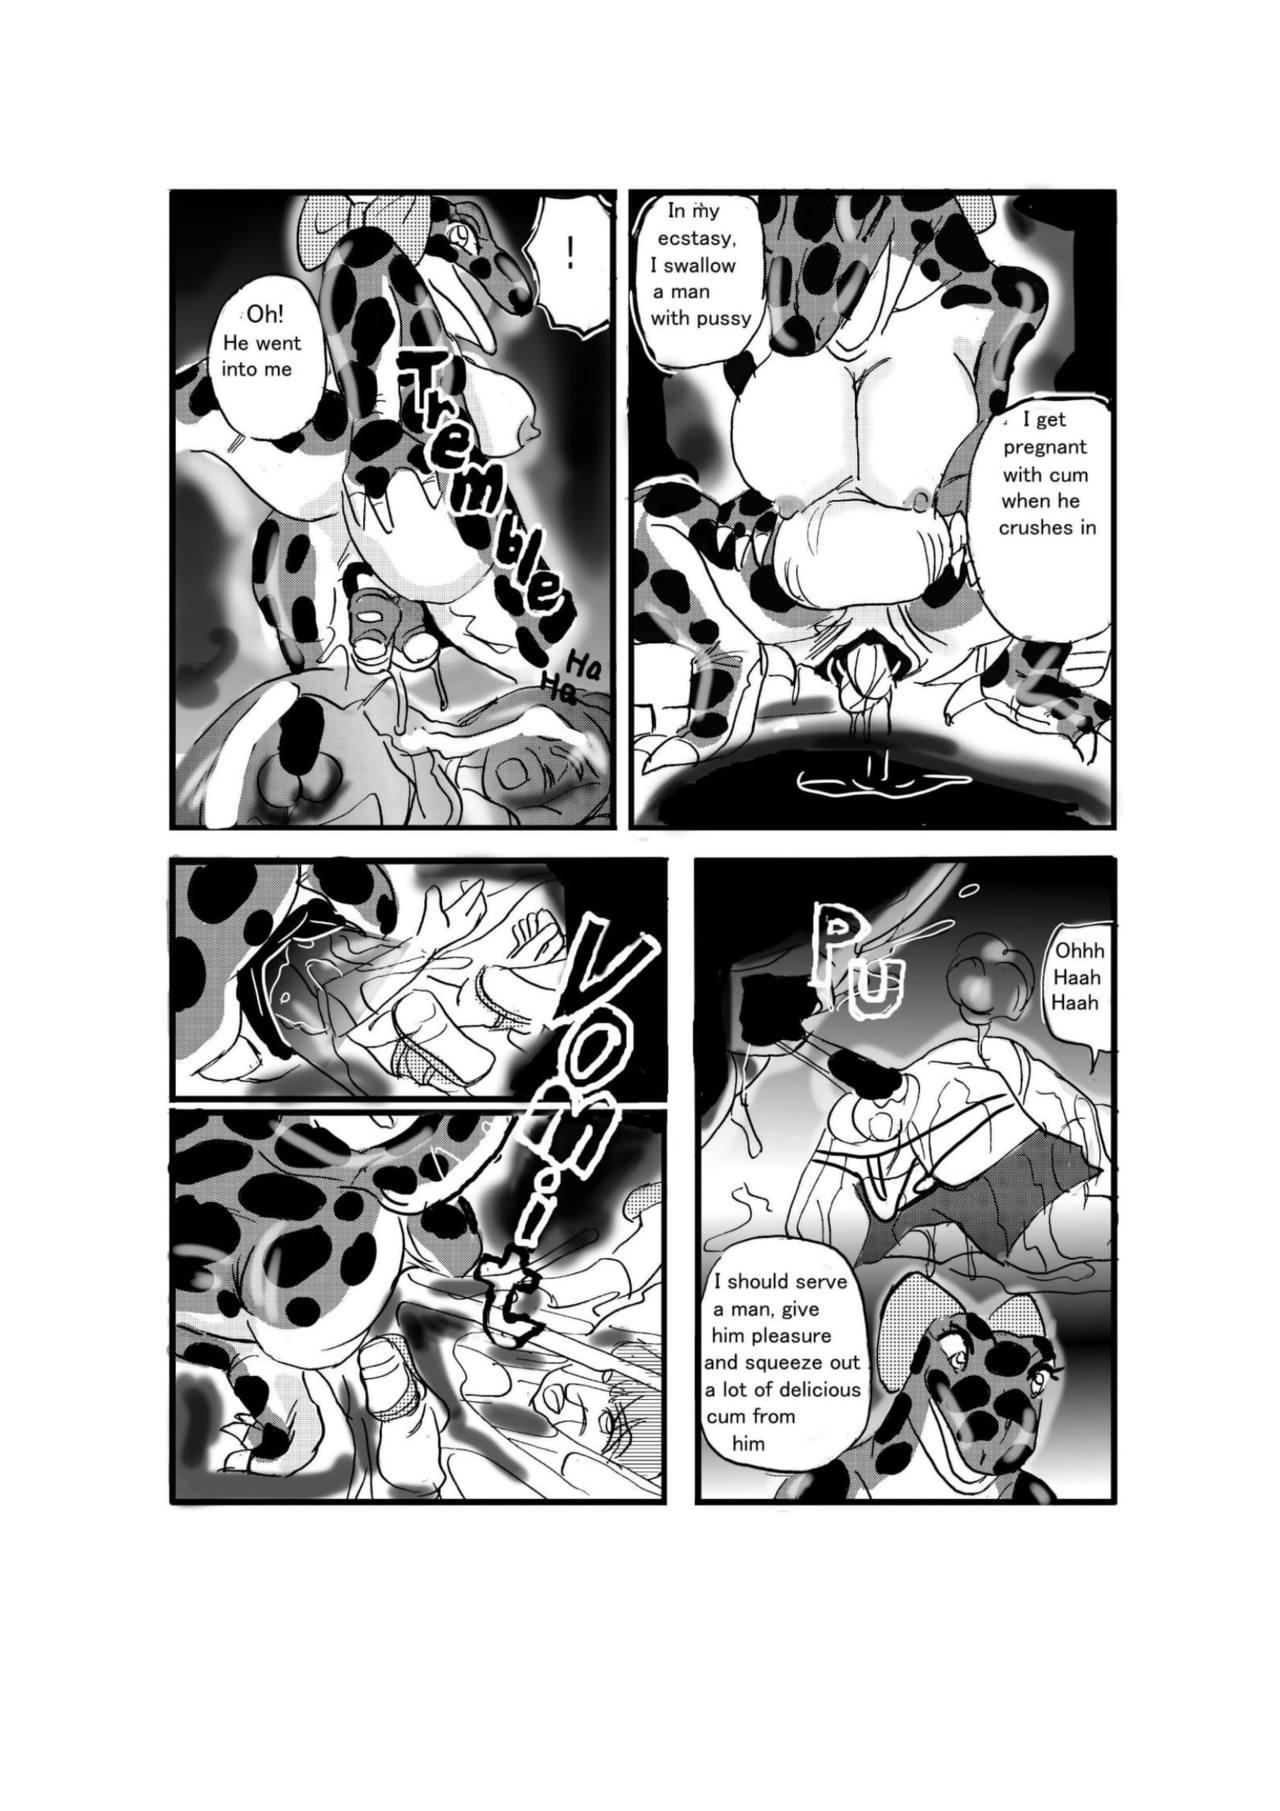 Anal Porn Swallowed Whole vol.2 Waniko + What's Digestion? - Original 4some - Page 6